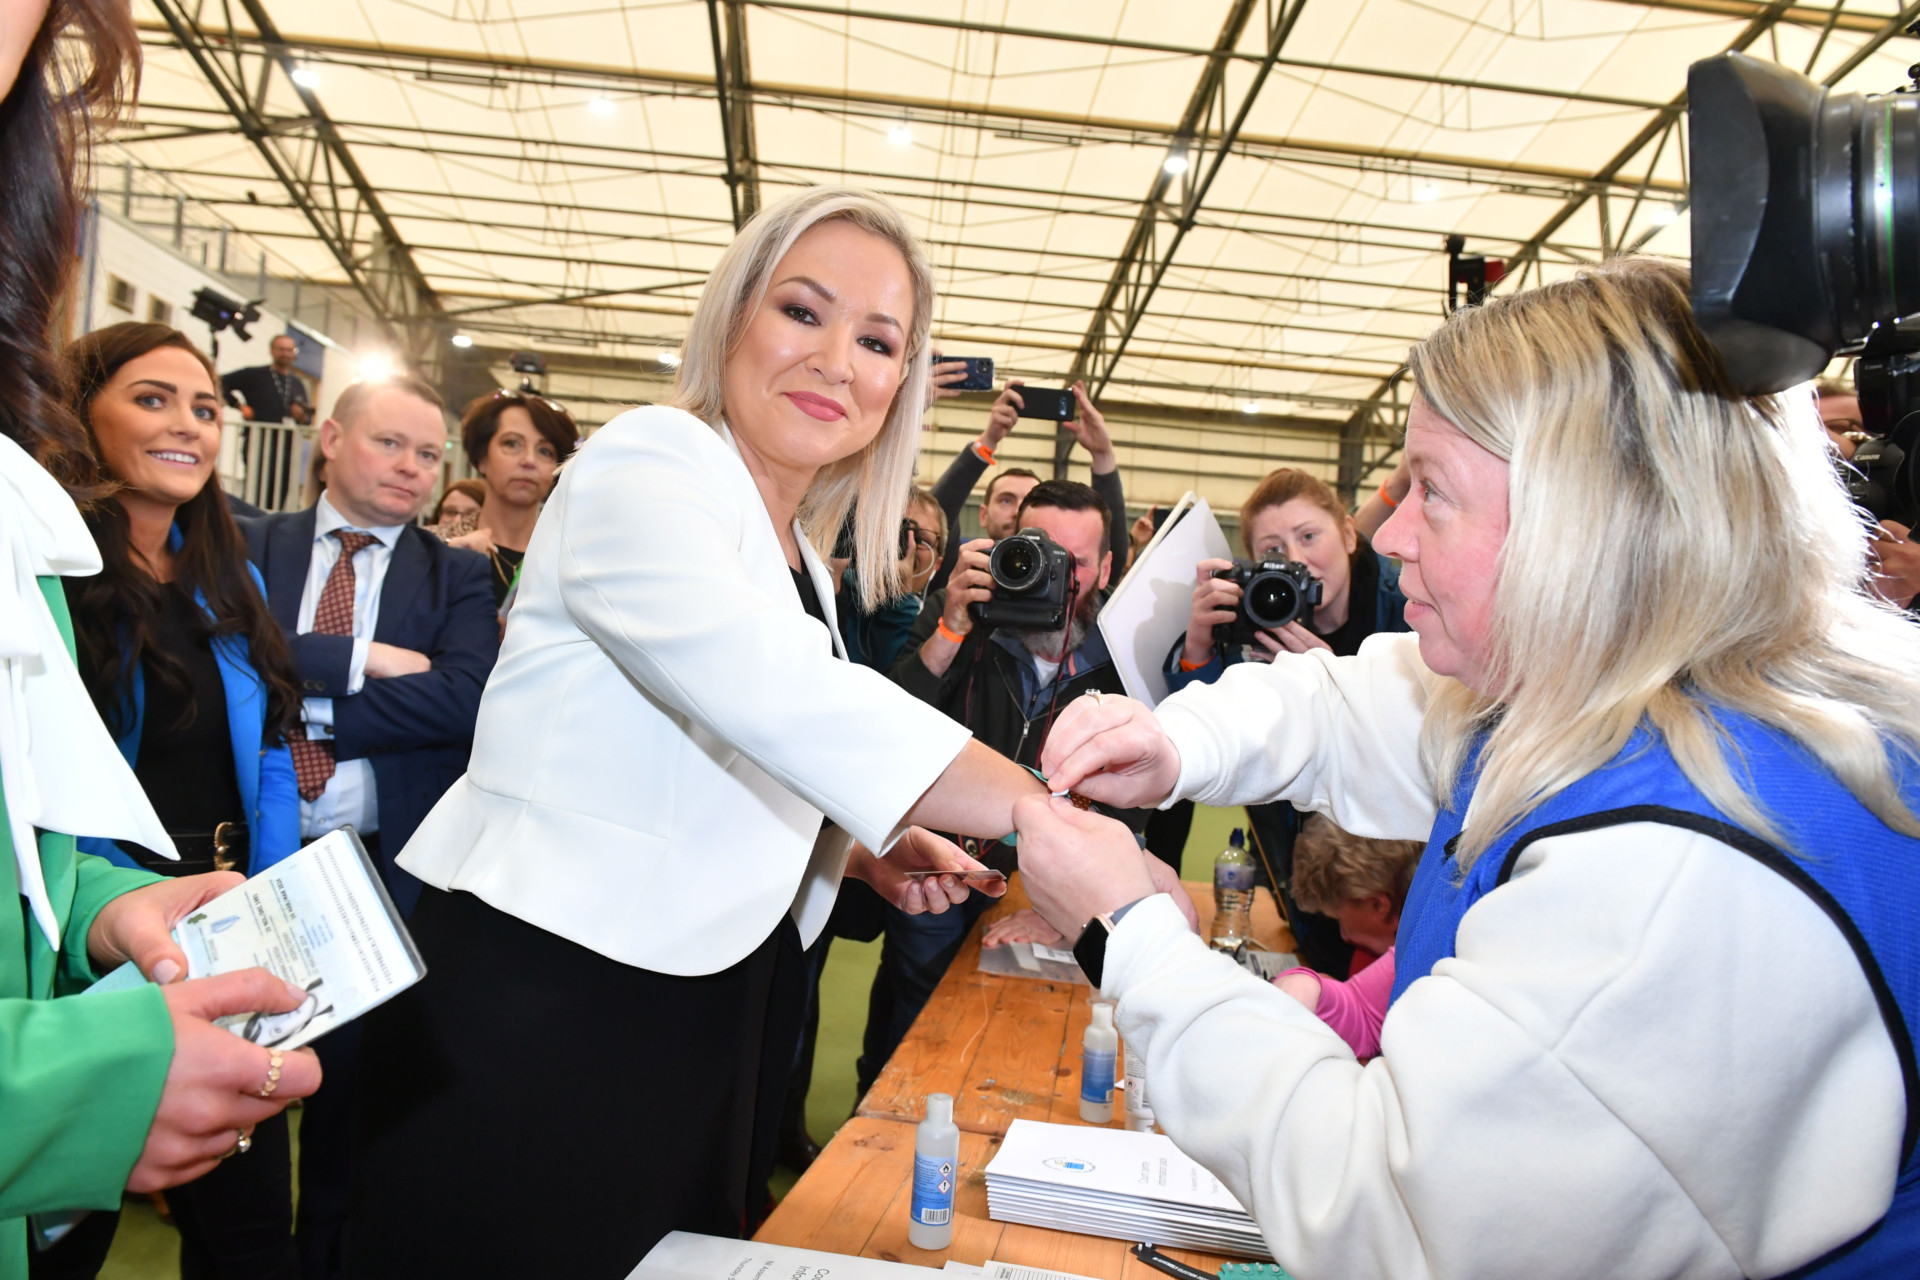 Sinn Fein candidates are the first across the line in Tyrone